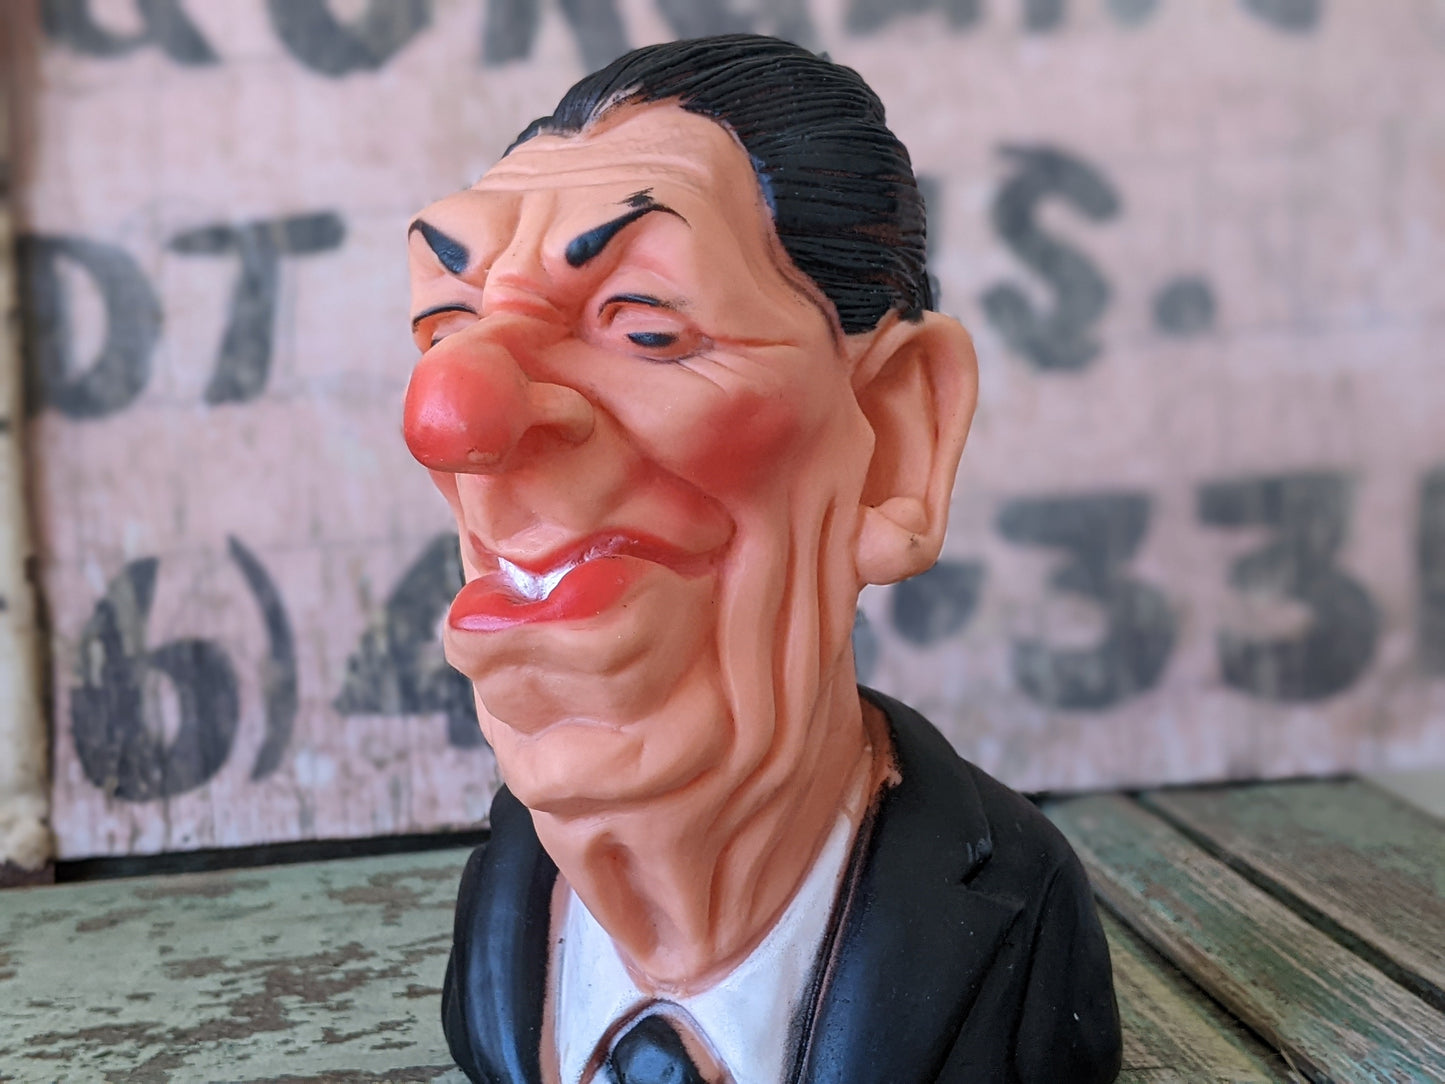 1984 Original Ronald Reagan Rubber Doggy Squeaker Toy by Spitting Image Original !! Awesome Vintage Gifts & Collectibles !!